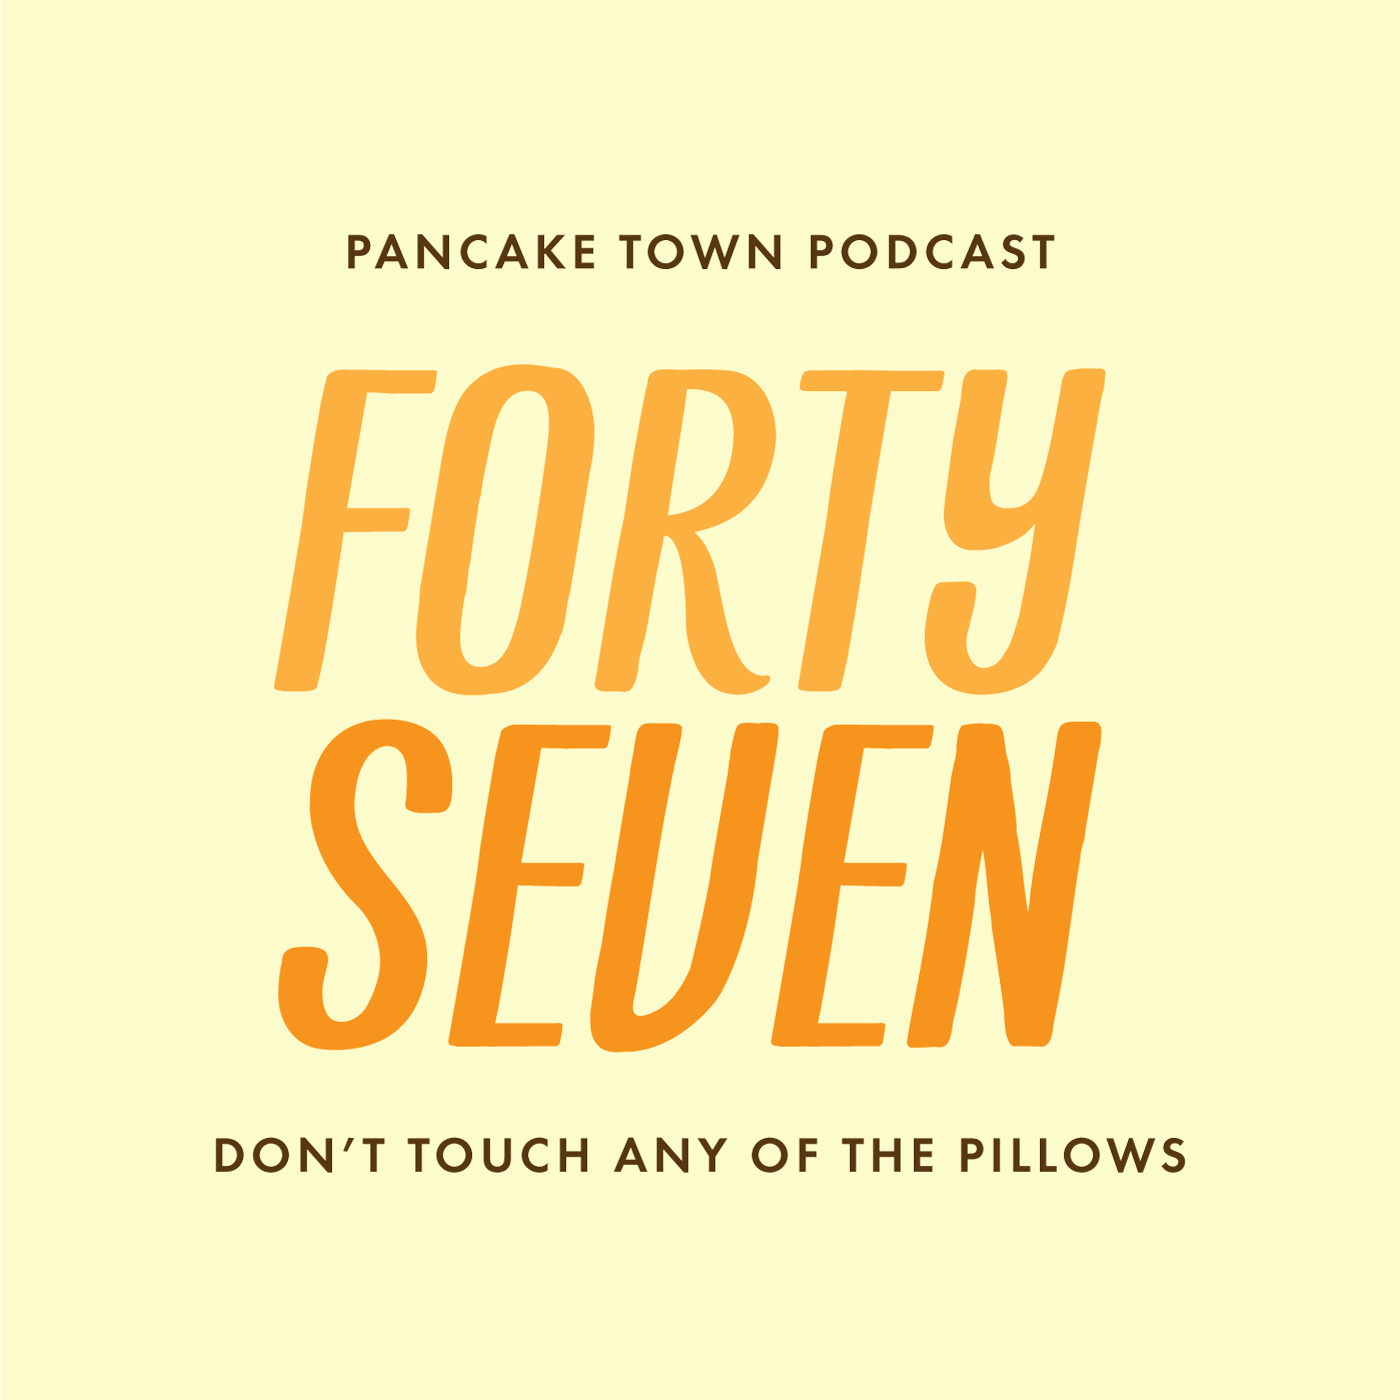 Episode 47 - Don't Touch Any of the Pillows